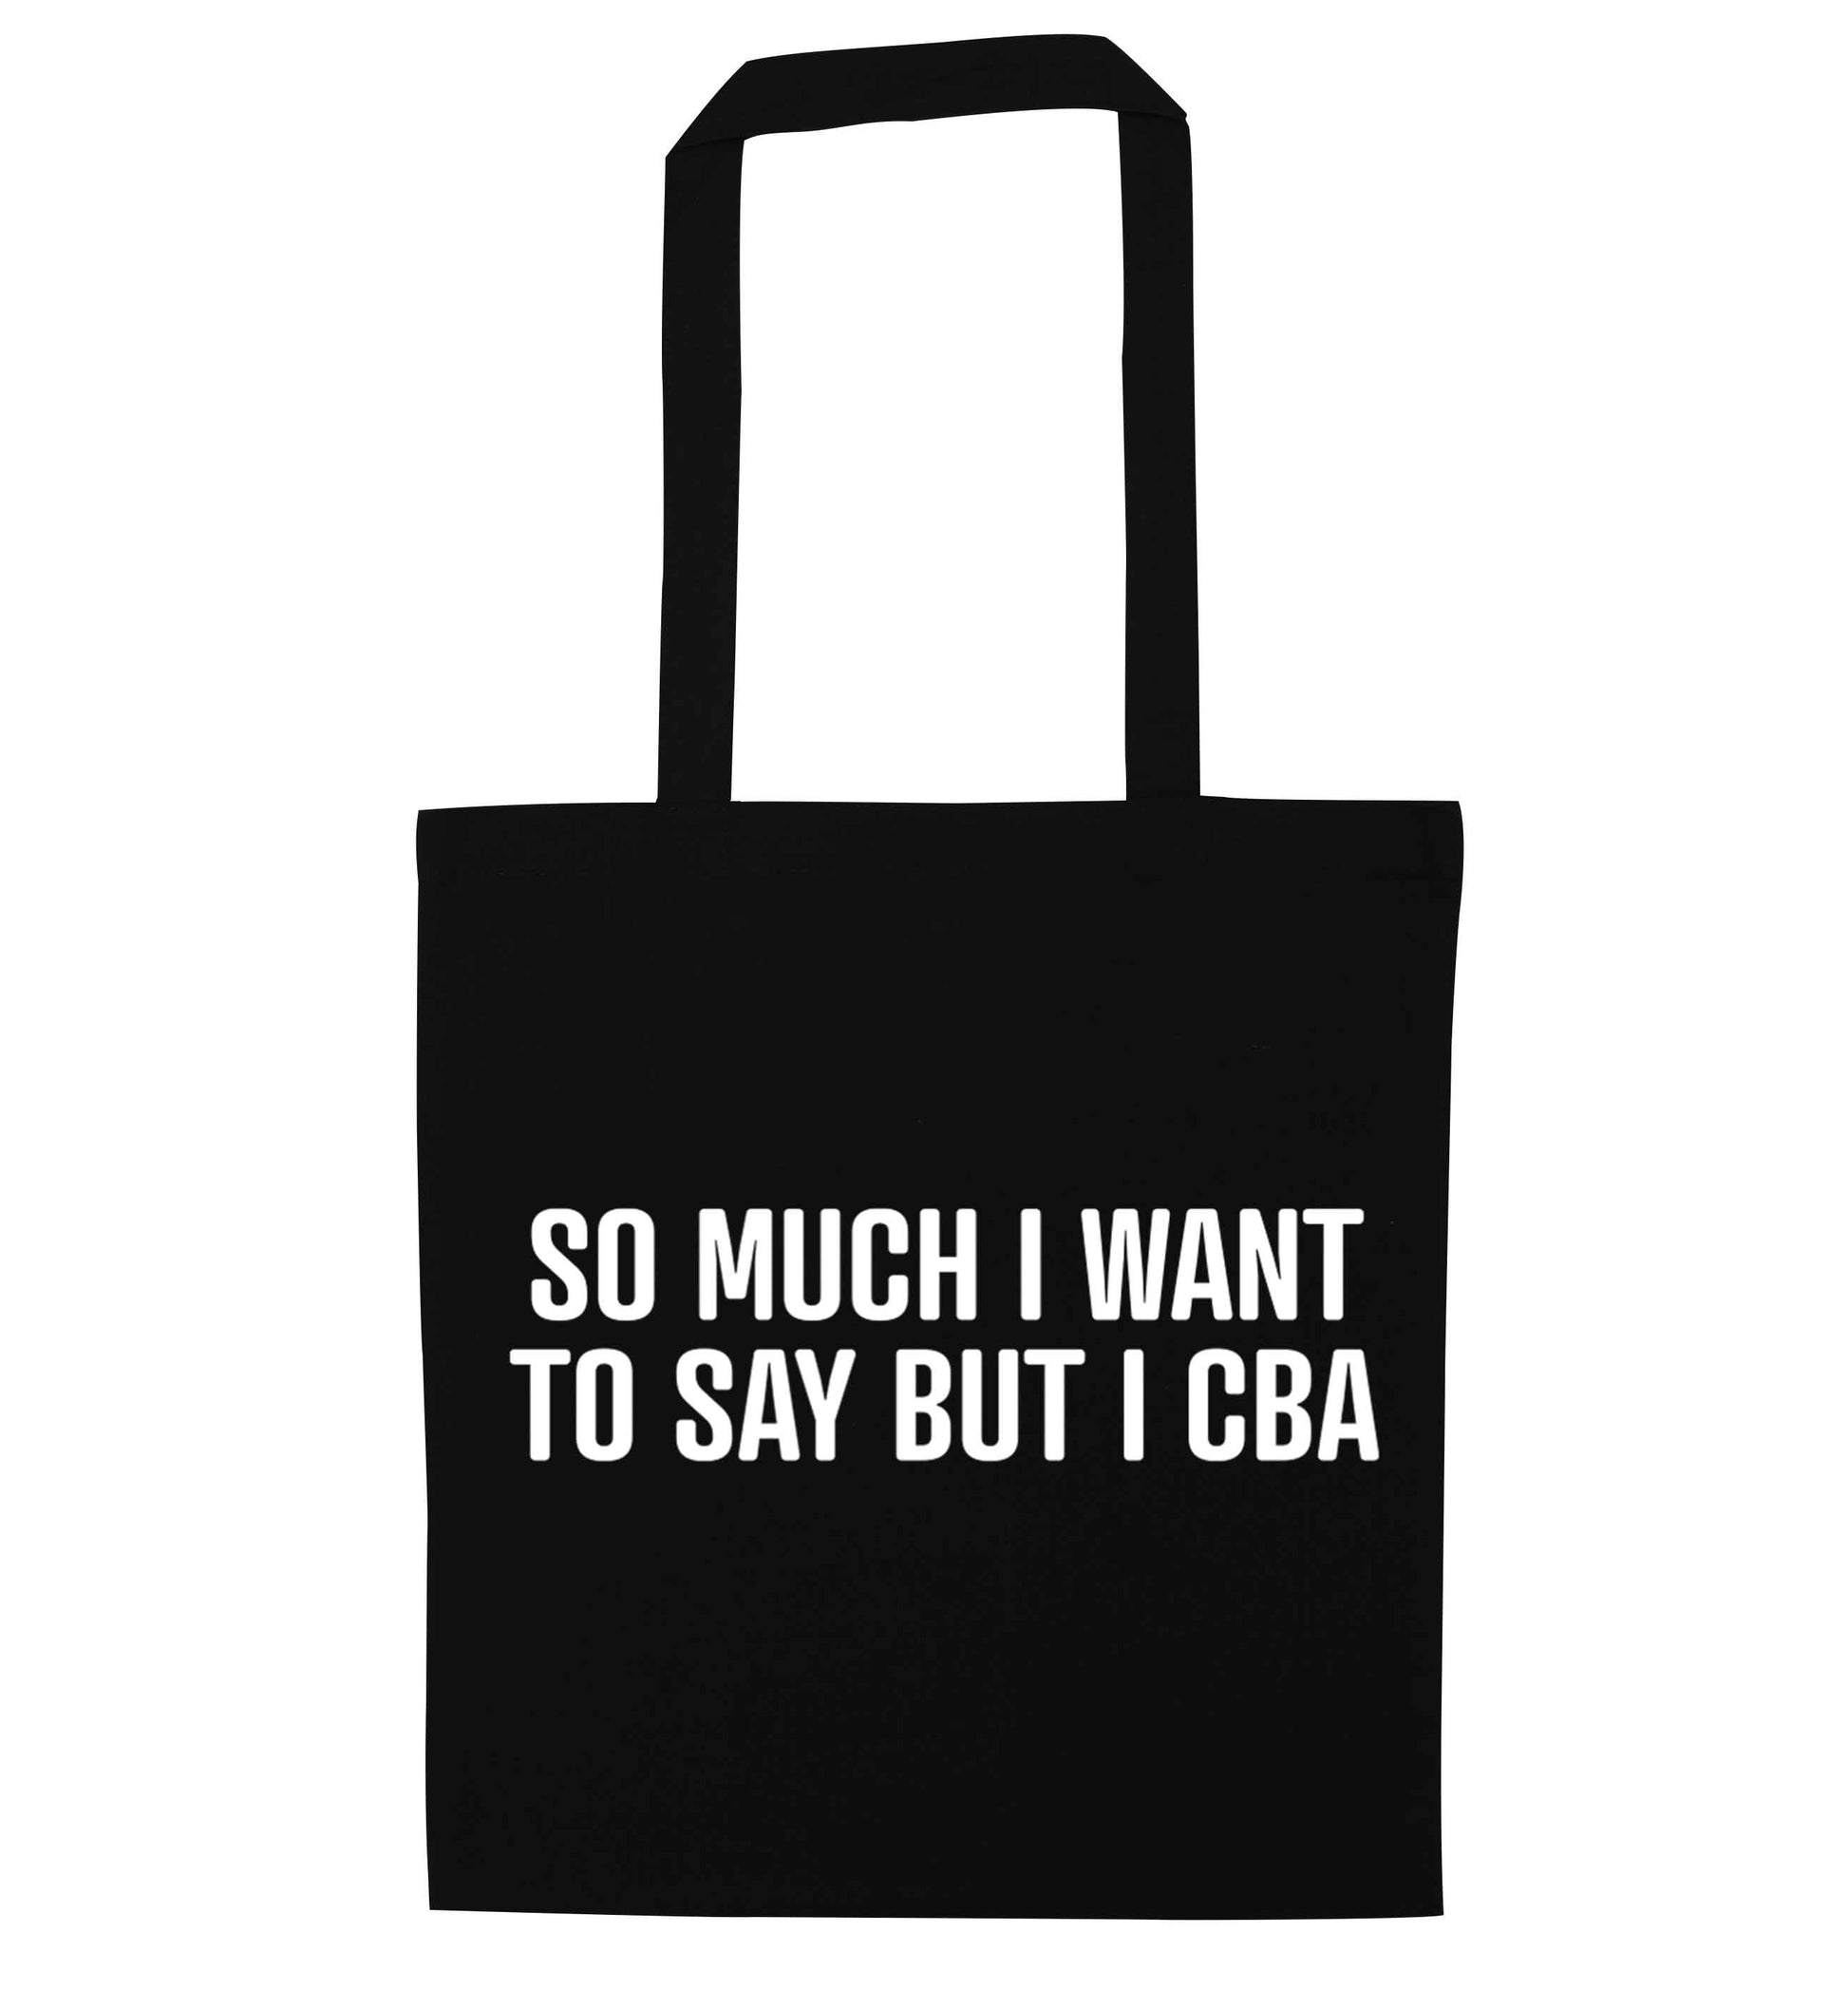 So much I want to say I cba  black tote bag